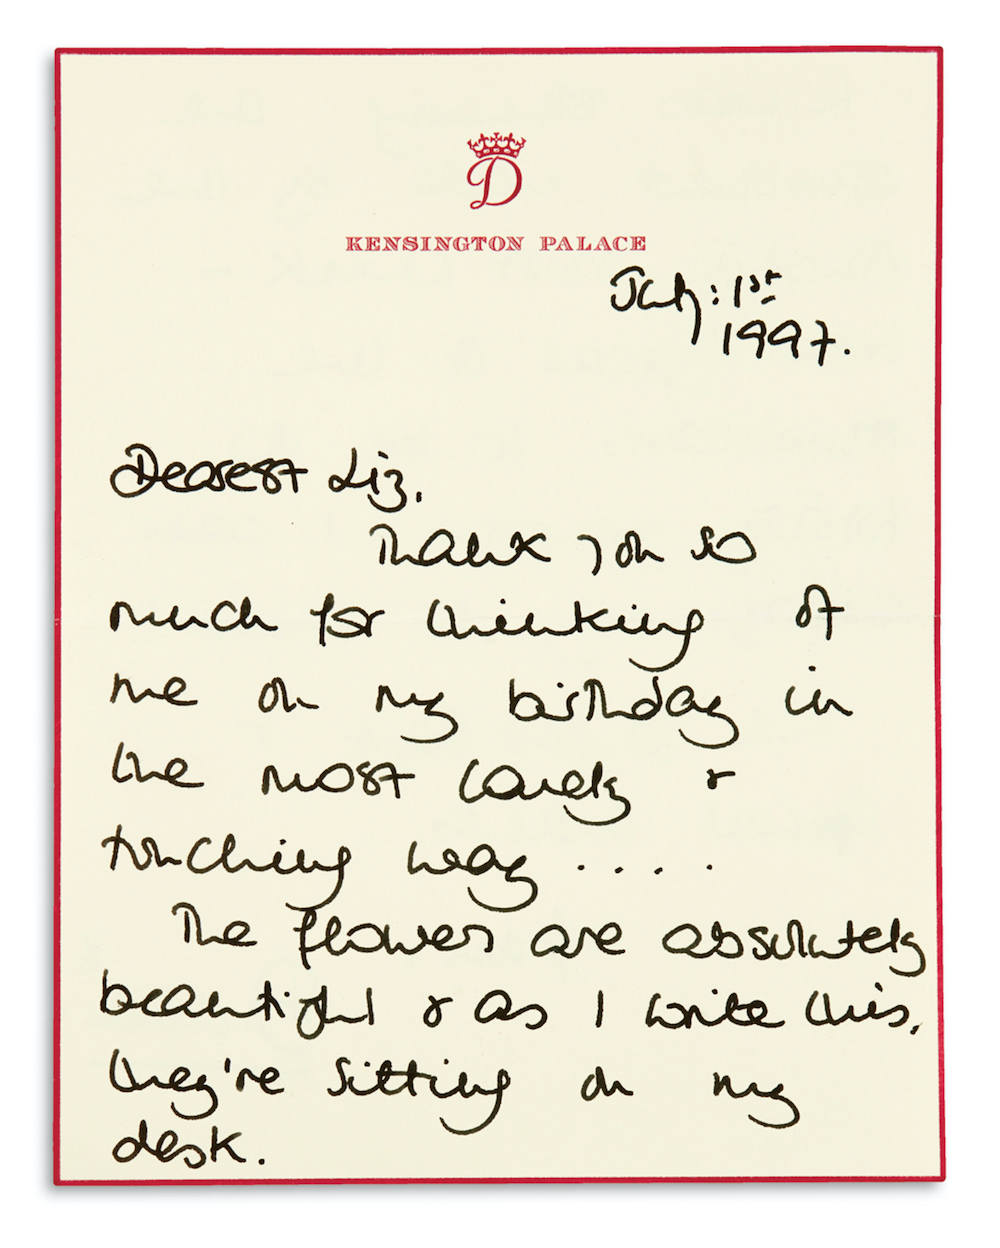 Letter written and signed by Princess Diana